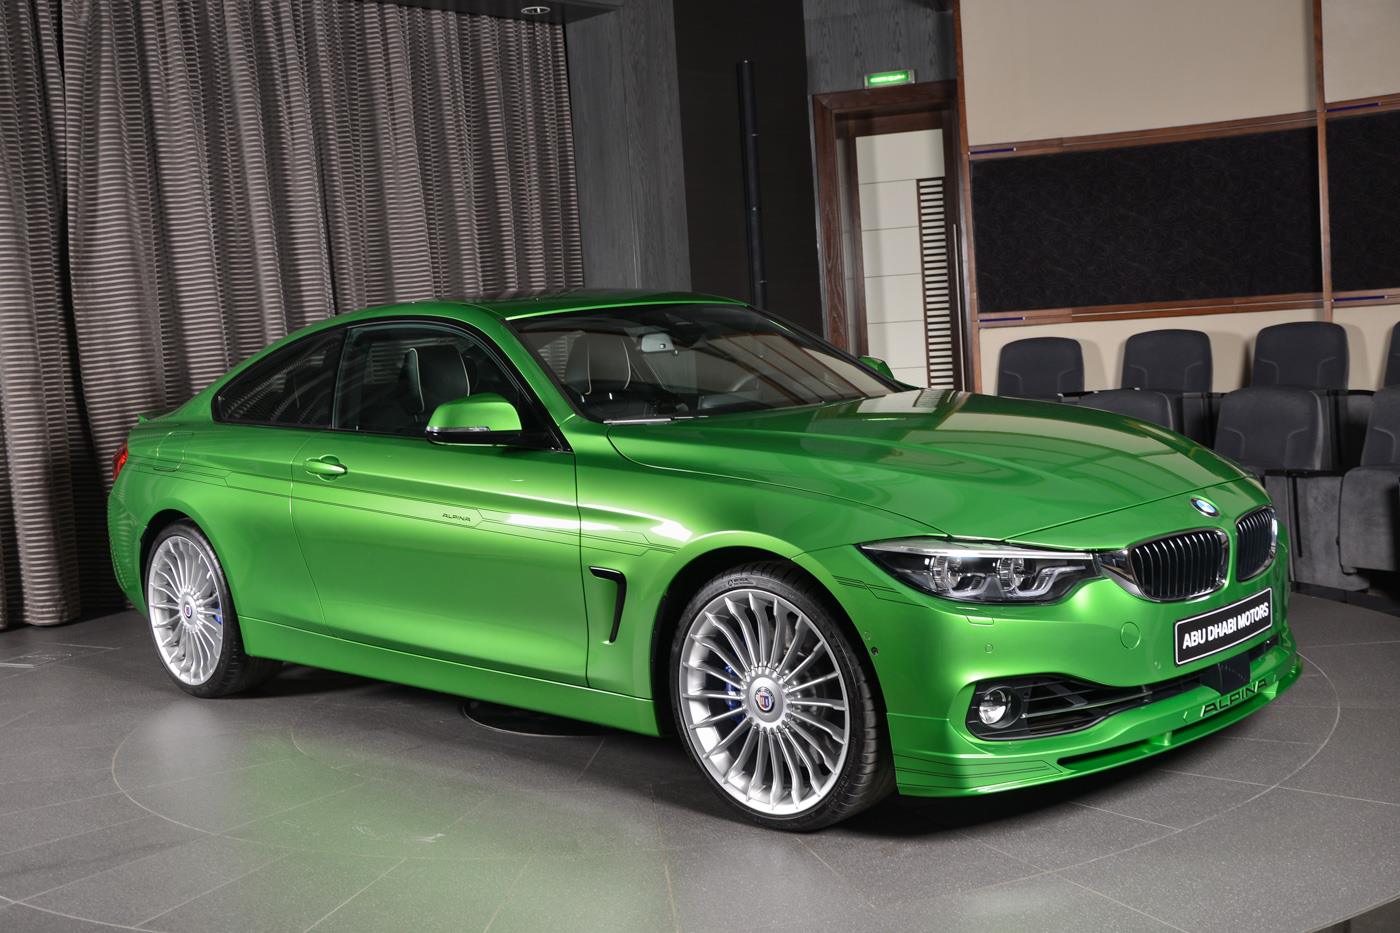 Alpina B4 S Bi-Turbo Coupe Could Make An M4 Green With Envy | Carscoops1400 x 933